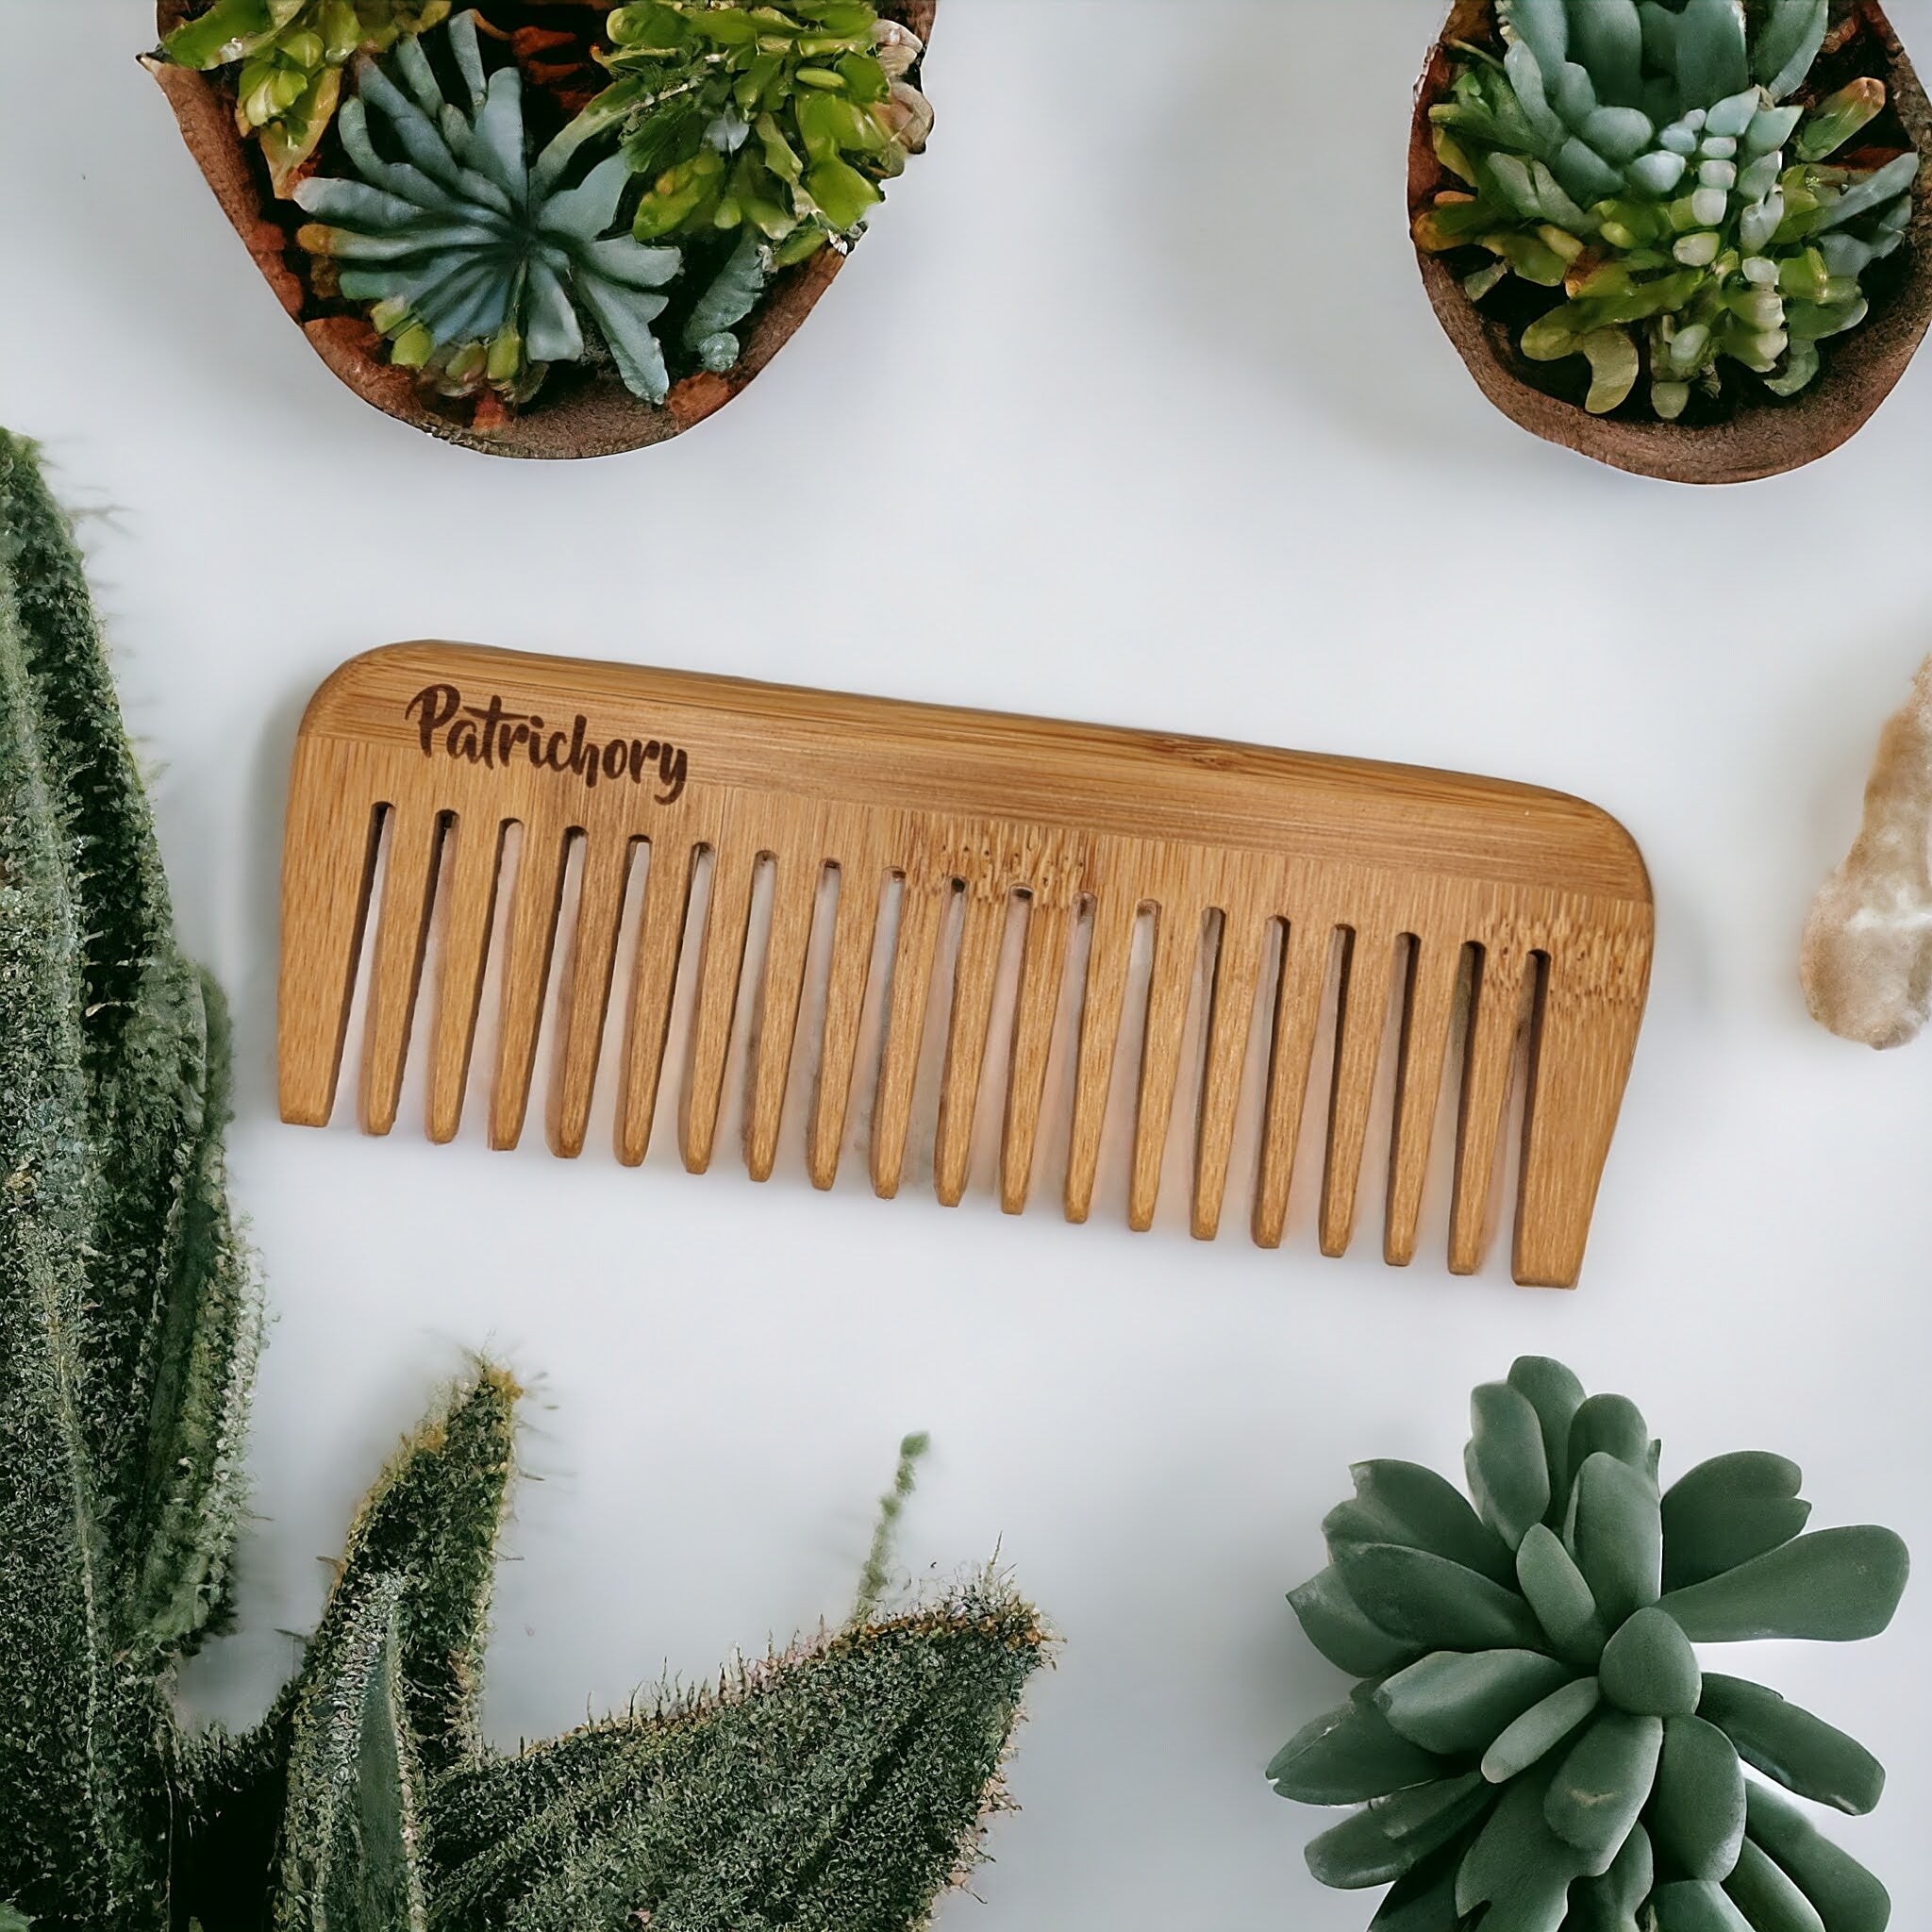 Patrichory Bamboo Comb | Haircare | The Green Collective SG